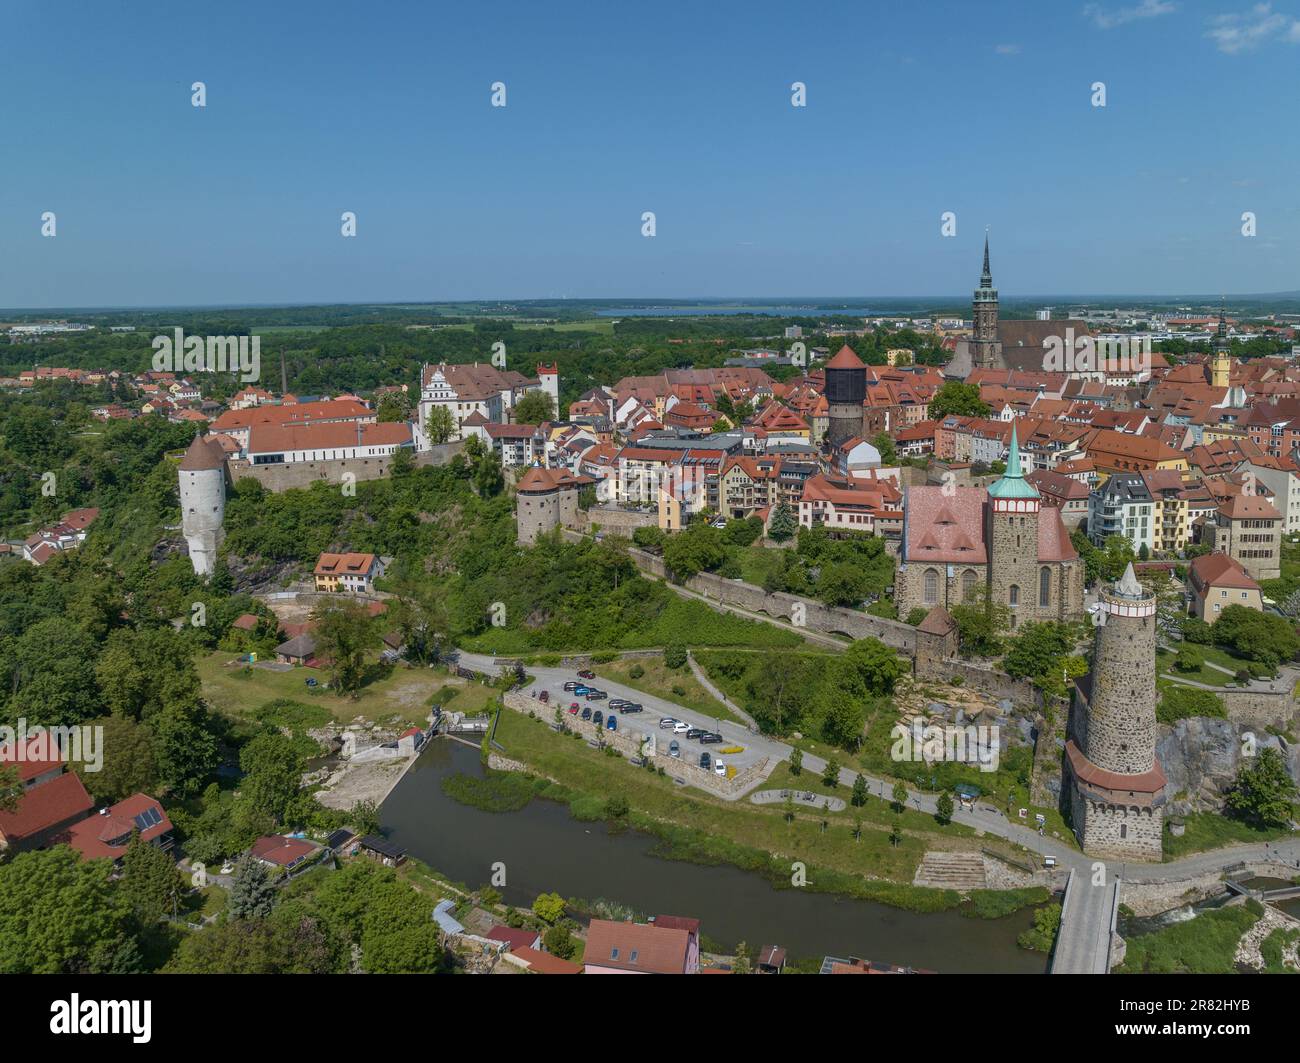 Aerial view of defensive towers and medieval fortification in historic Bautzen Saxony Germany Stock Photo